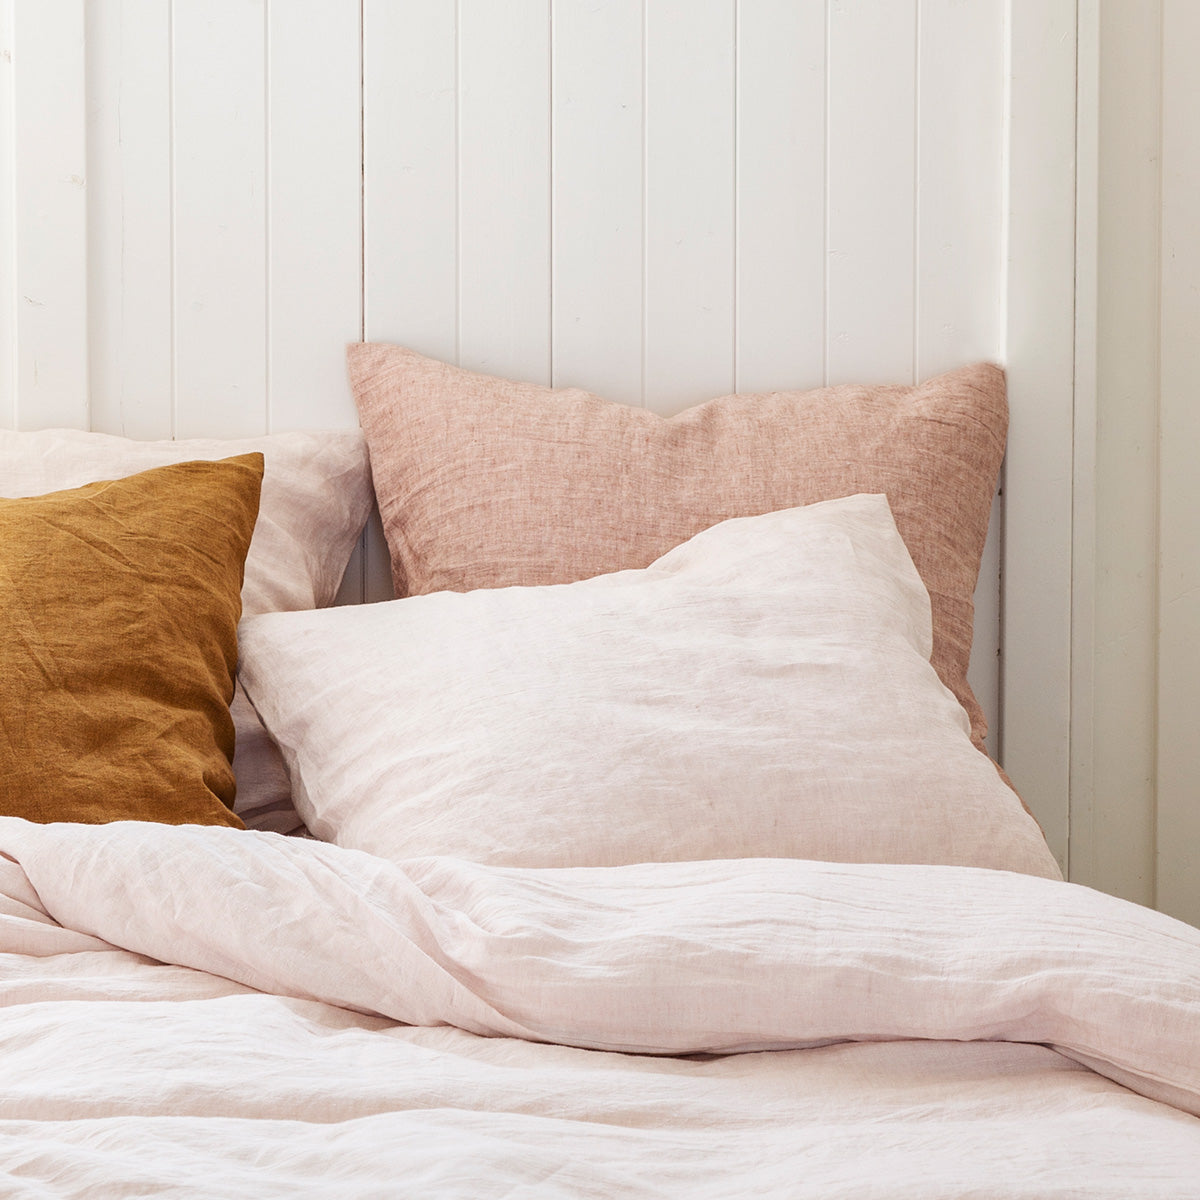 linen pillow case in blush, a powdery soft pink shade